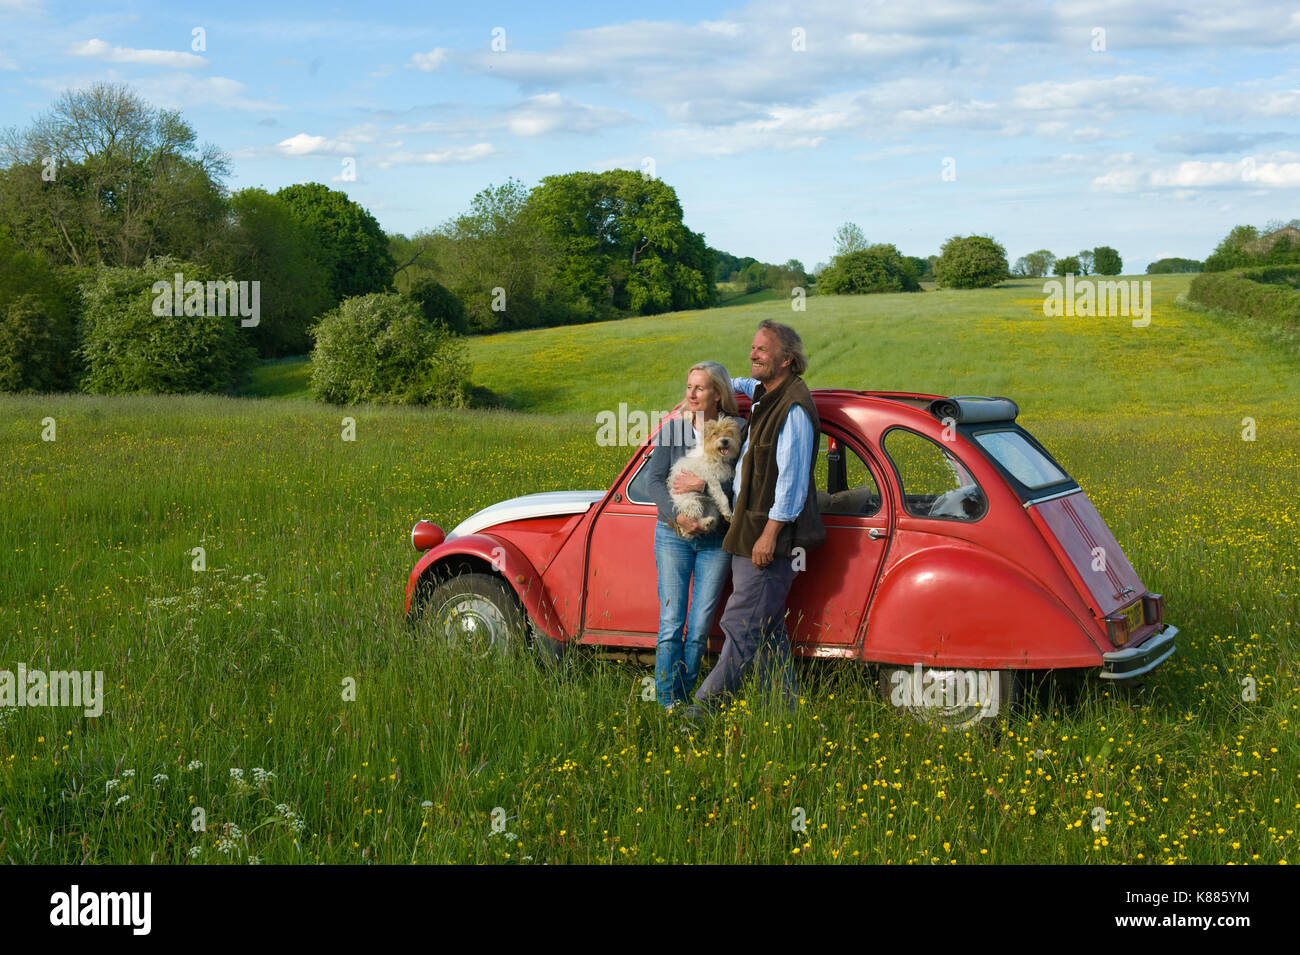 Man and woman standing side by side on a meadow, holding small dog, leaning against red vintage car. Stock Photo